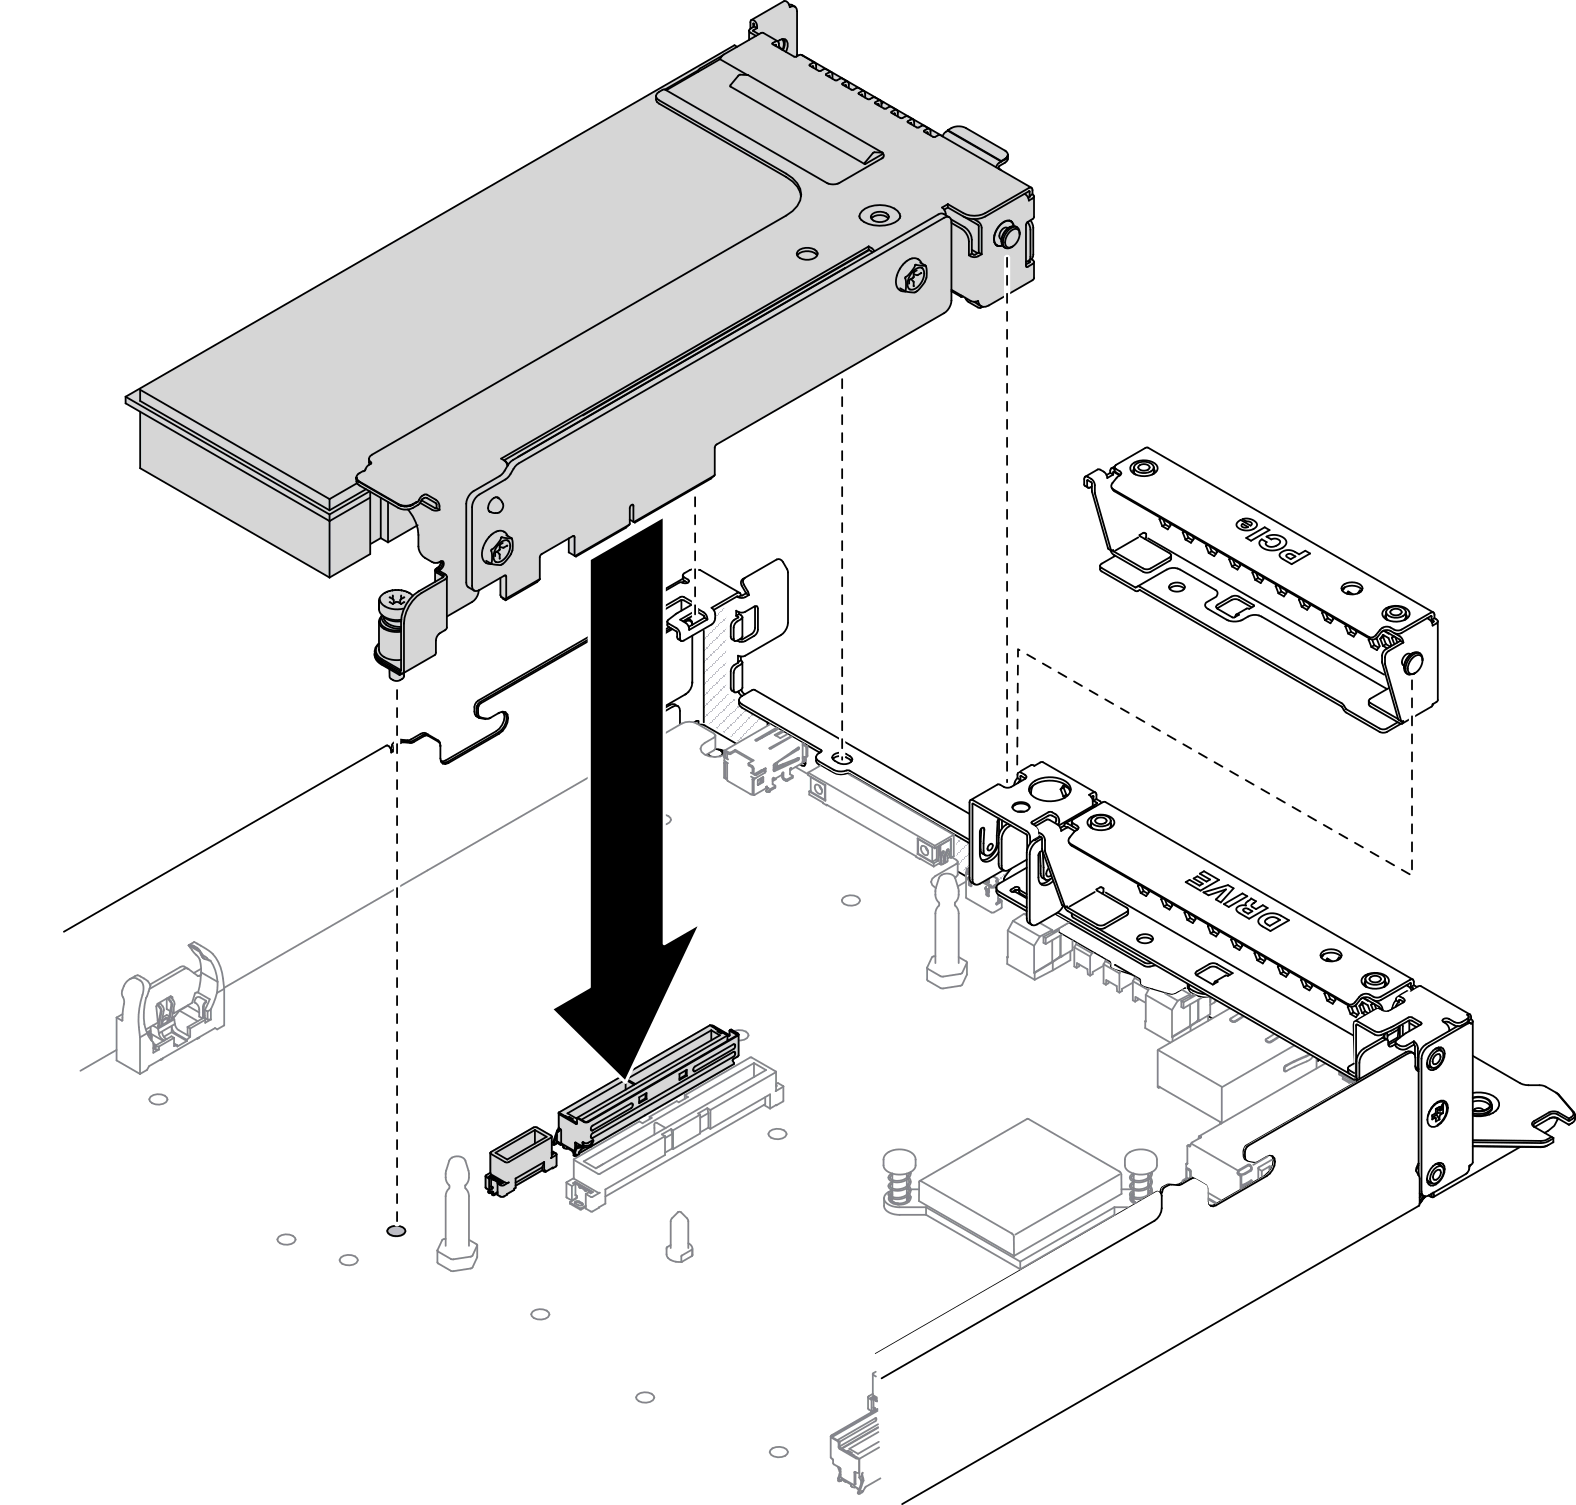 PCIe riser assembly installation